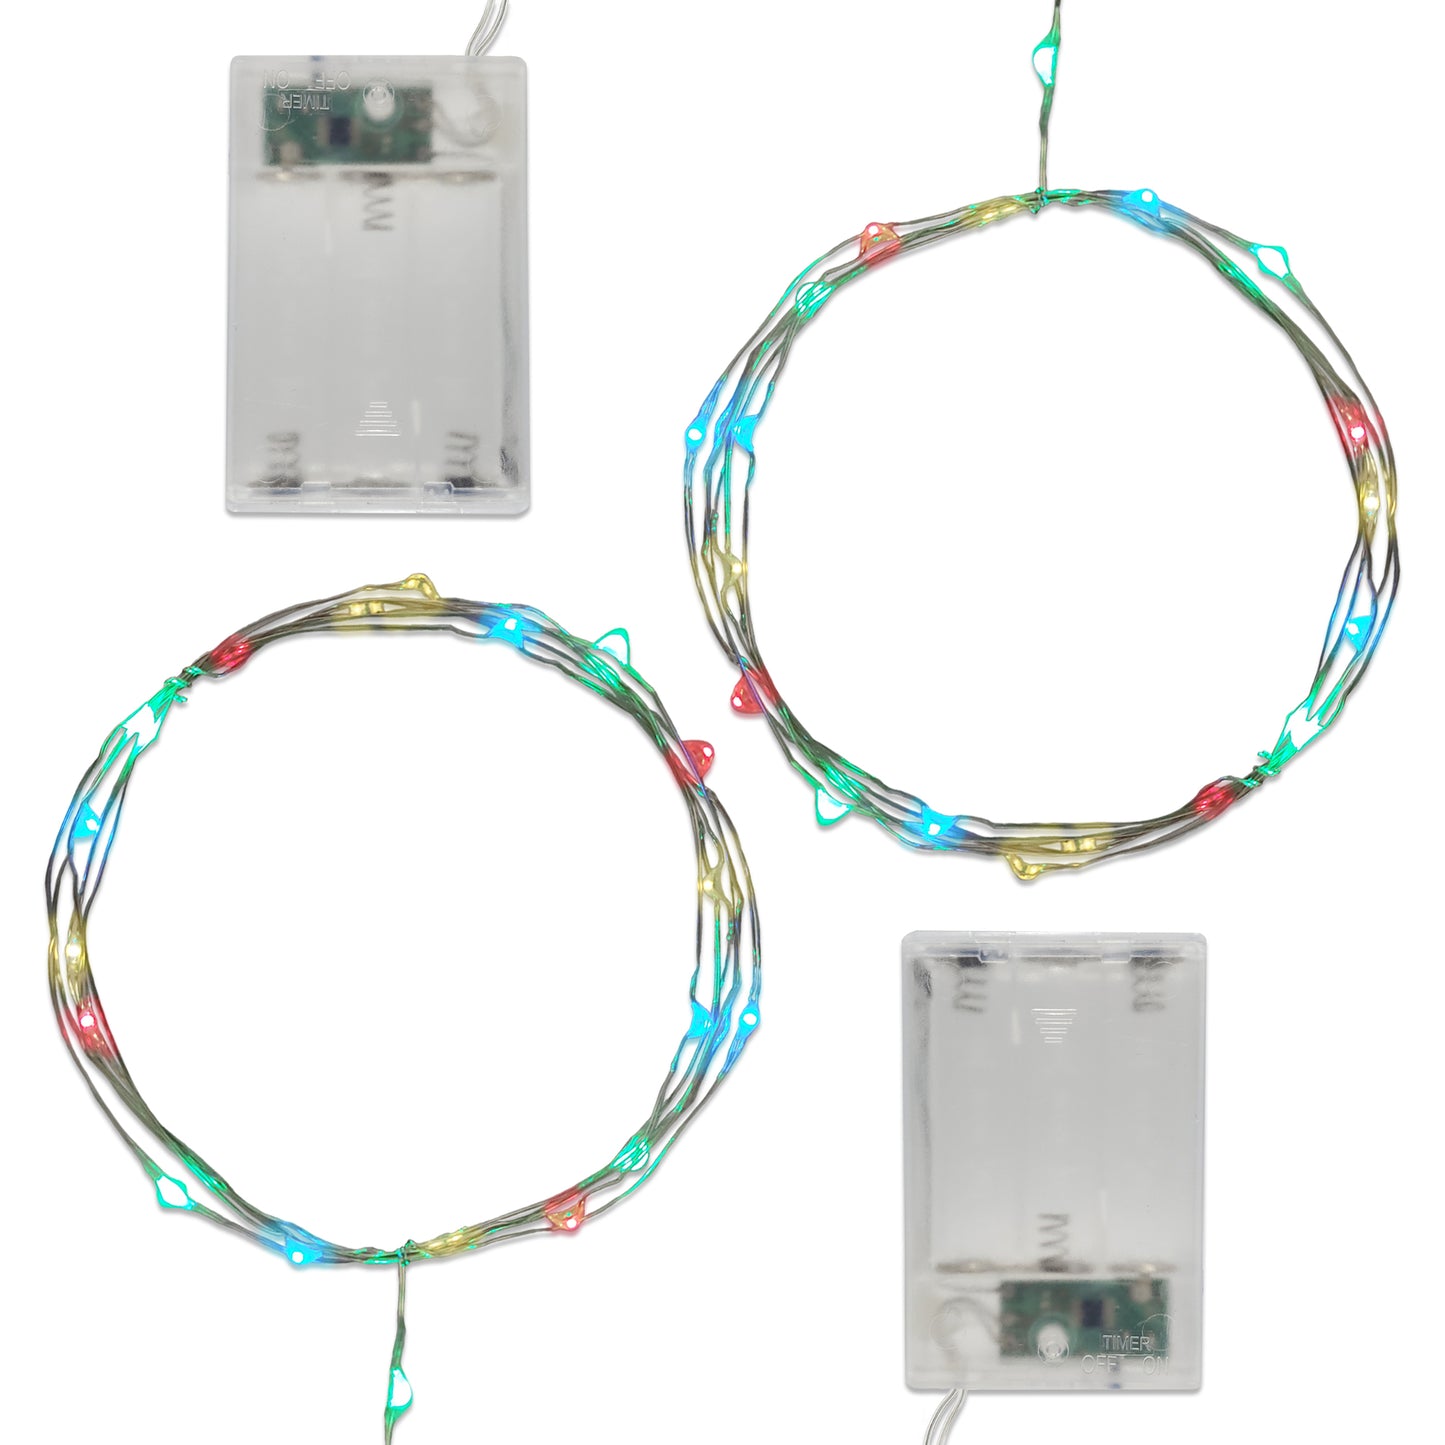 Battery Operated LED Fairy String Lights - Set of 2 - Multicolor